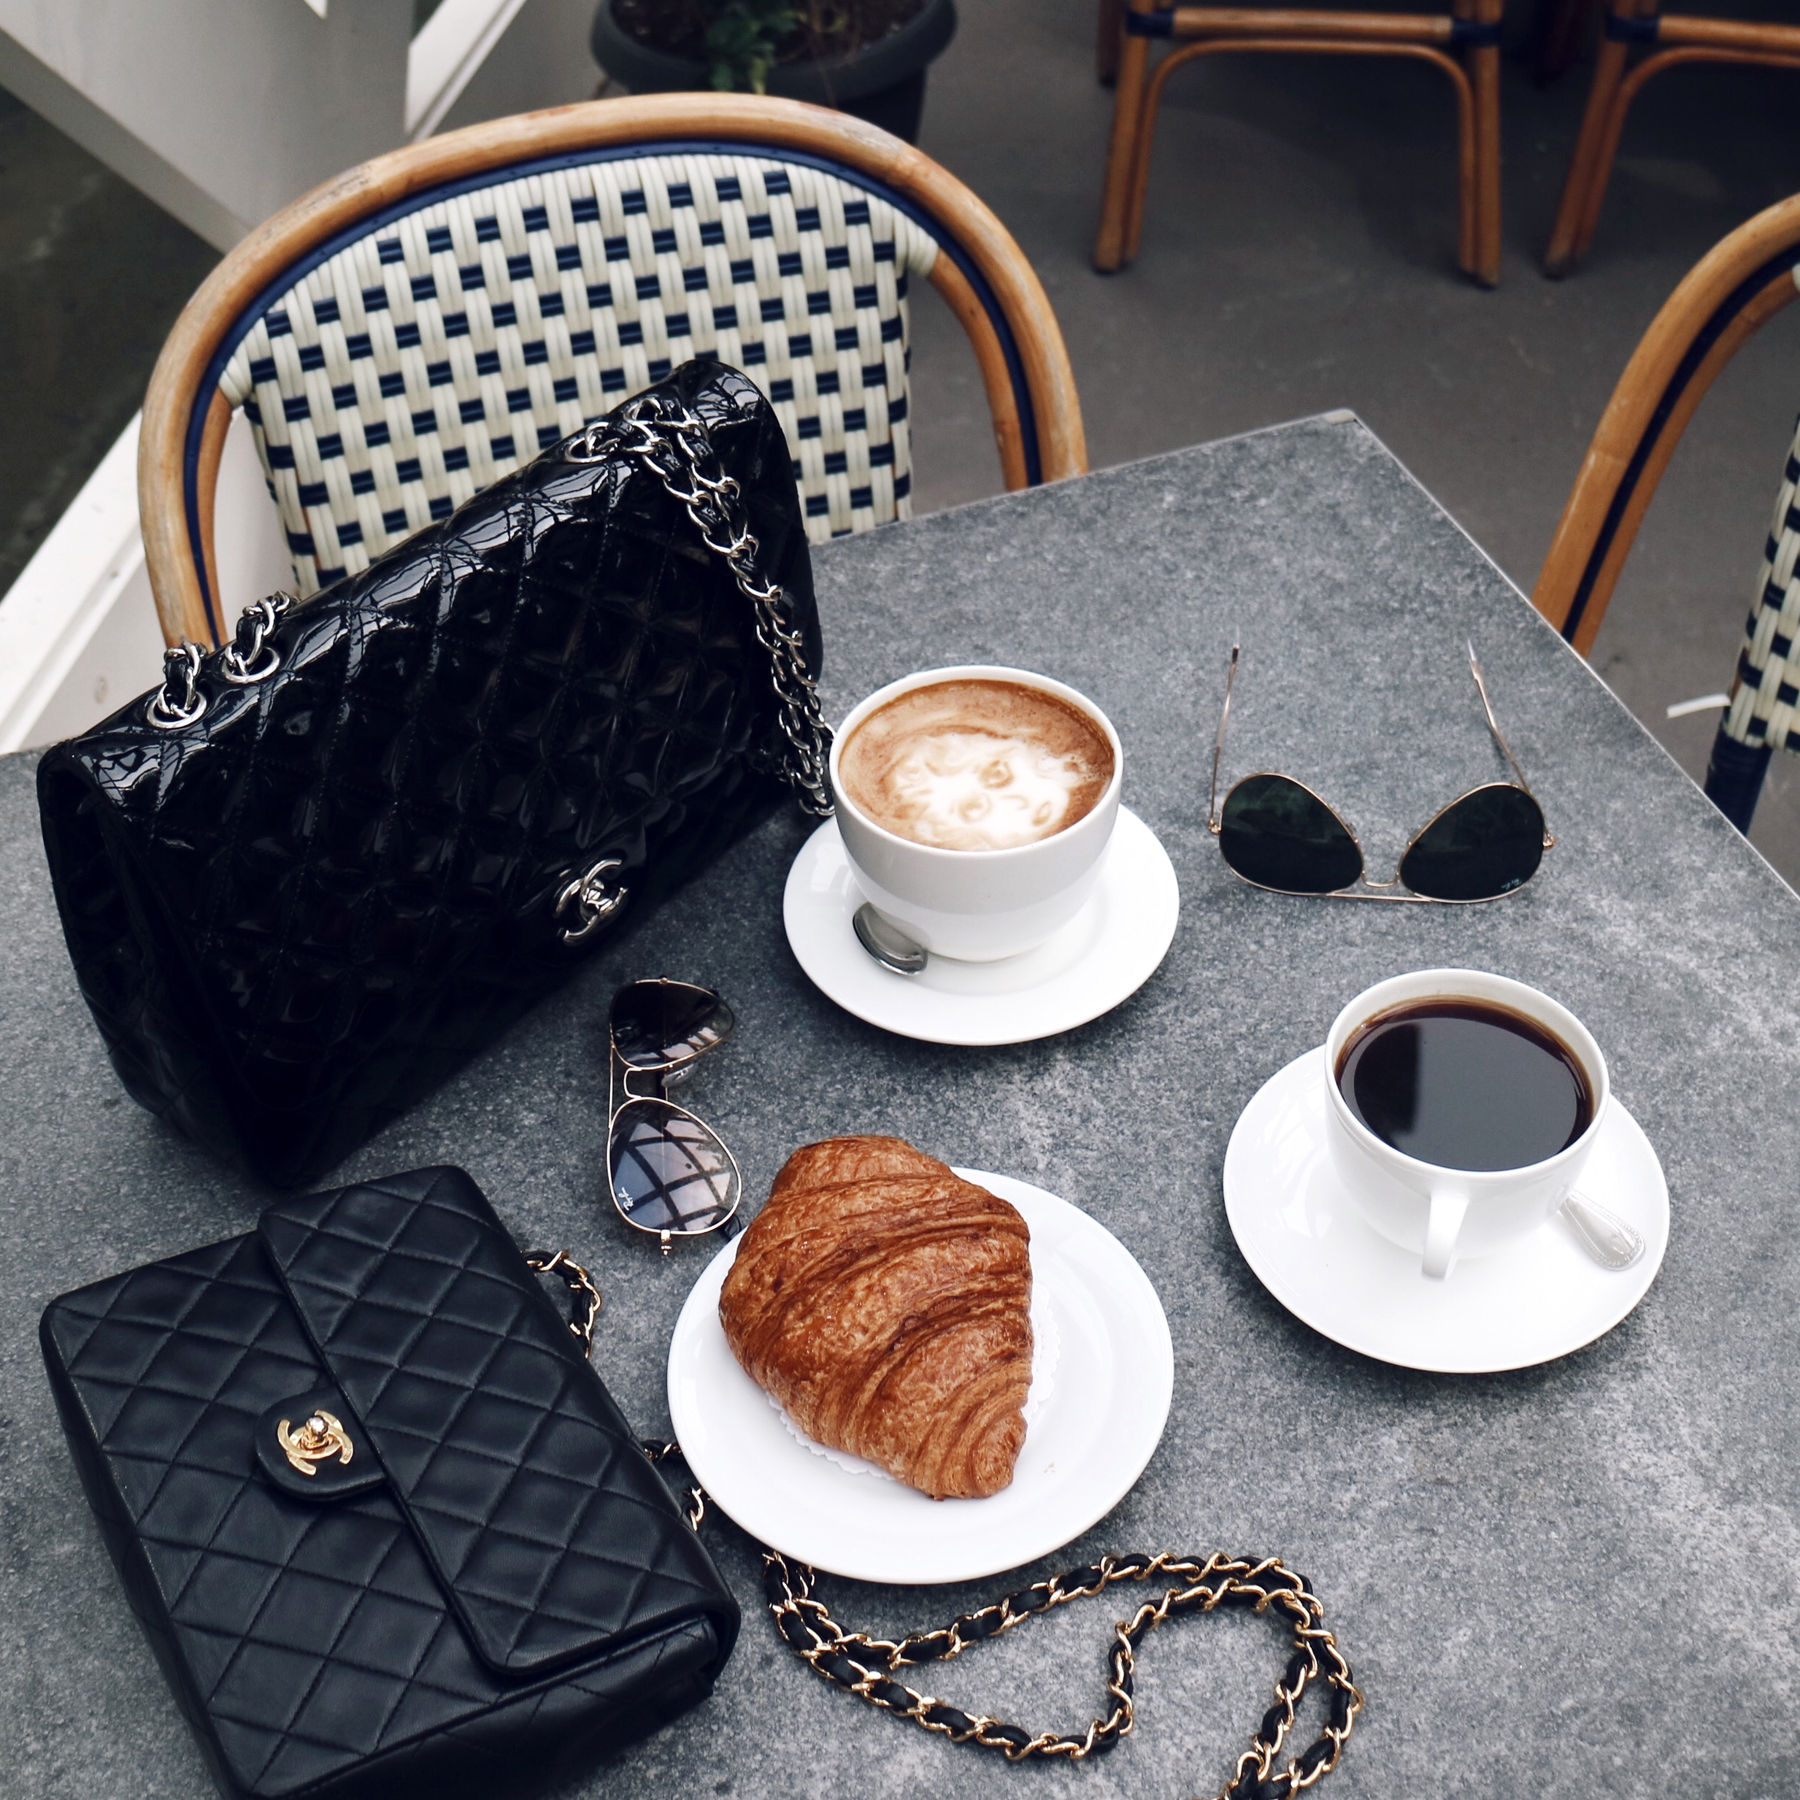 How to Authenticate a CHANEL Bag with LOVEthatBAG